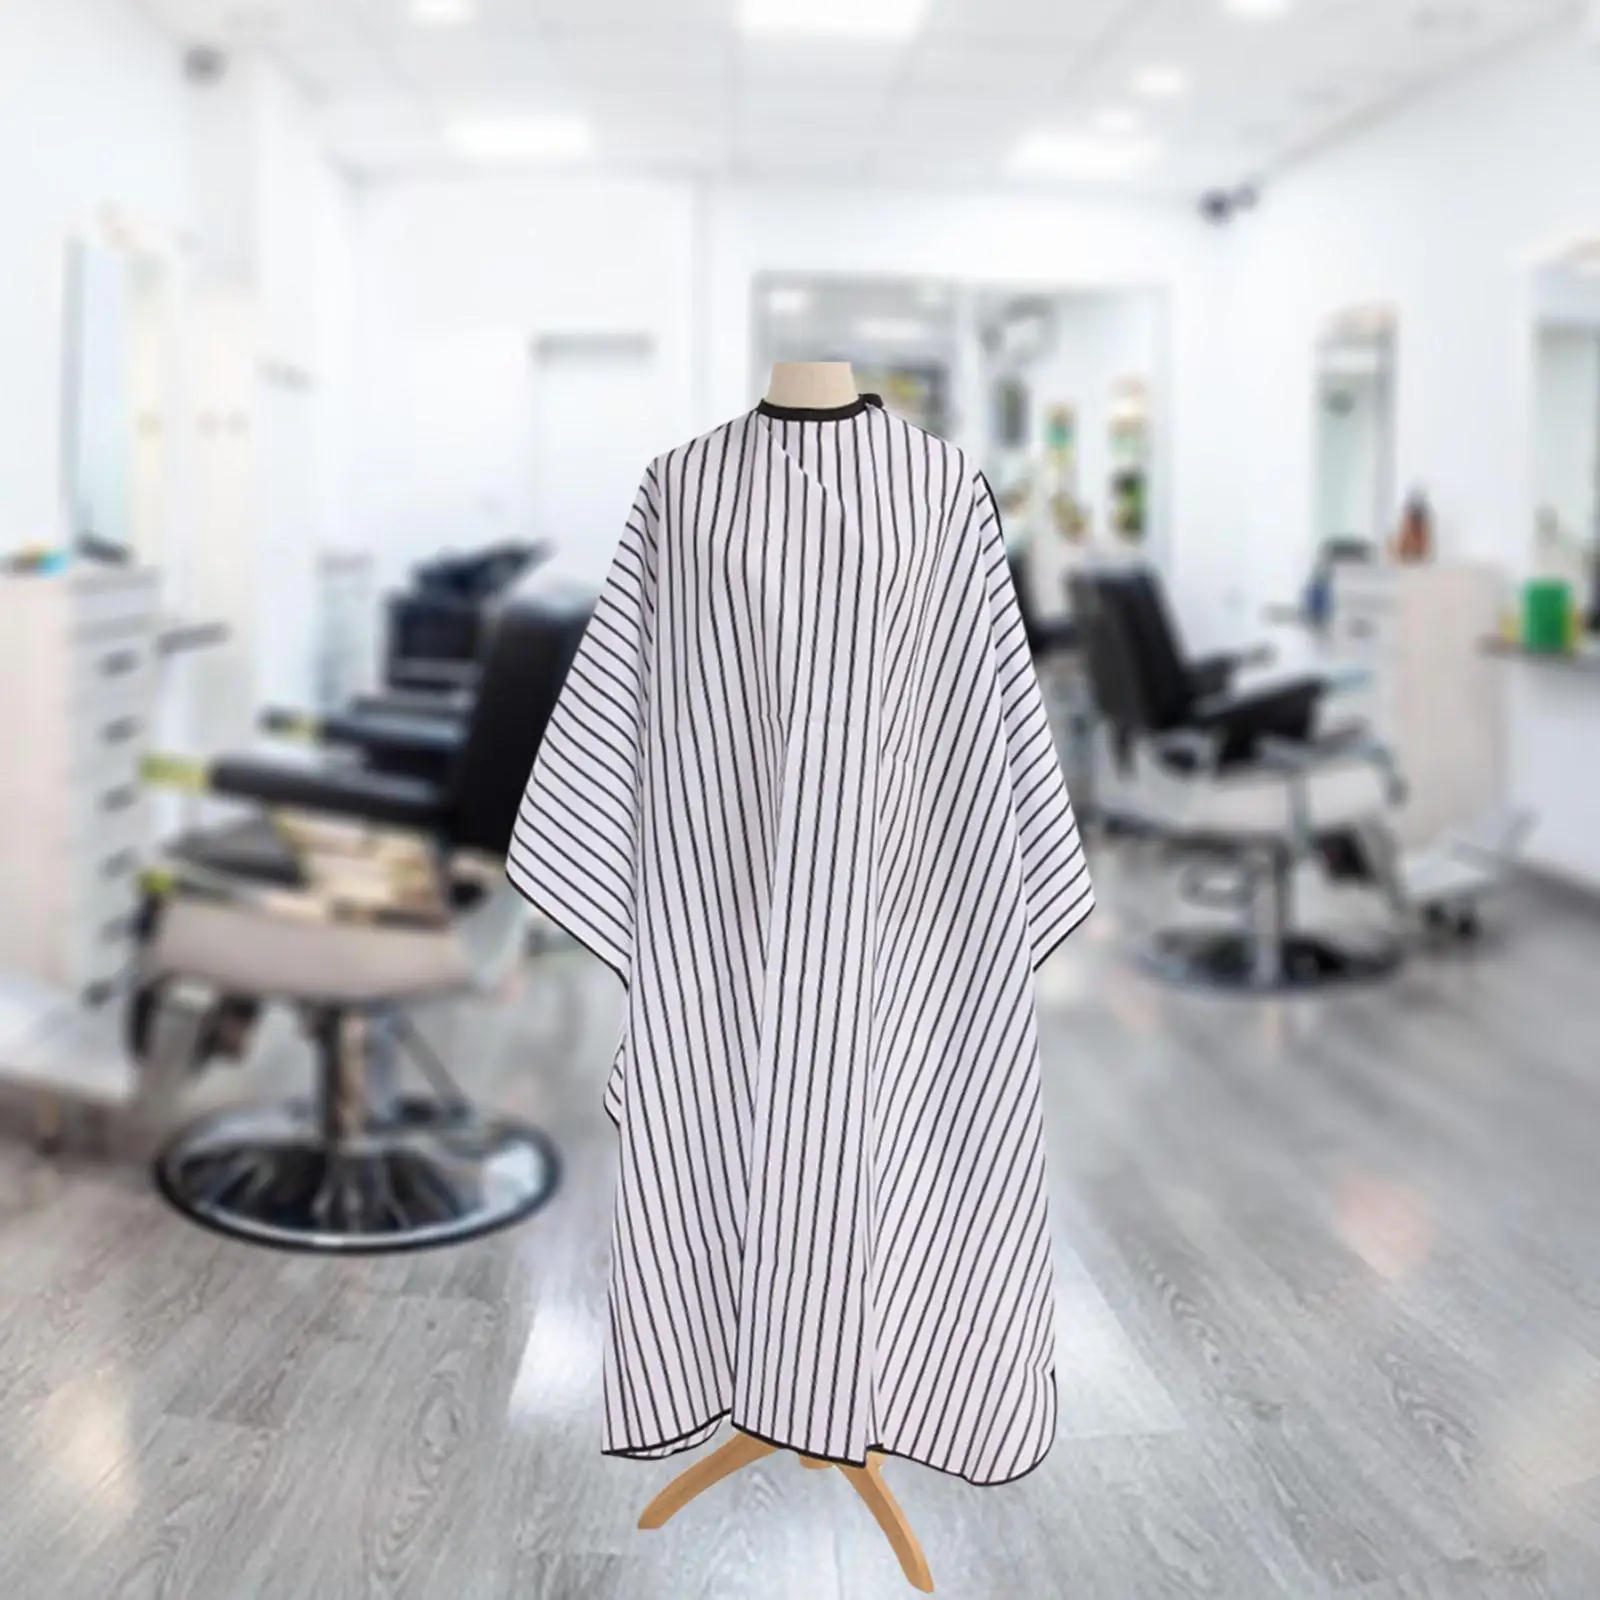 Hair Cutting Cape Stripe Pattern 160x140cm Professional with Snap Cloth Accessories for Barber Hairdressing Gown Hairstylist